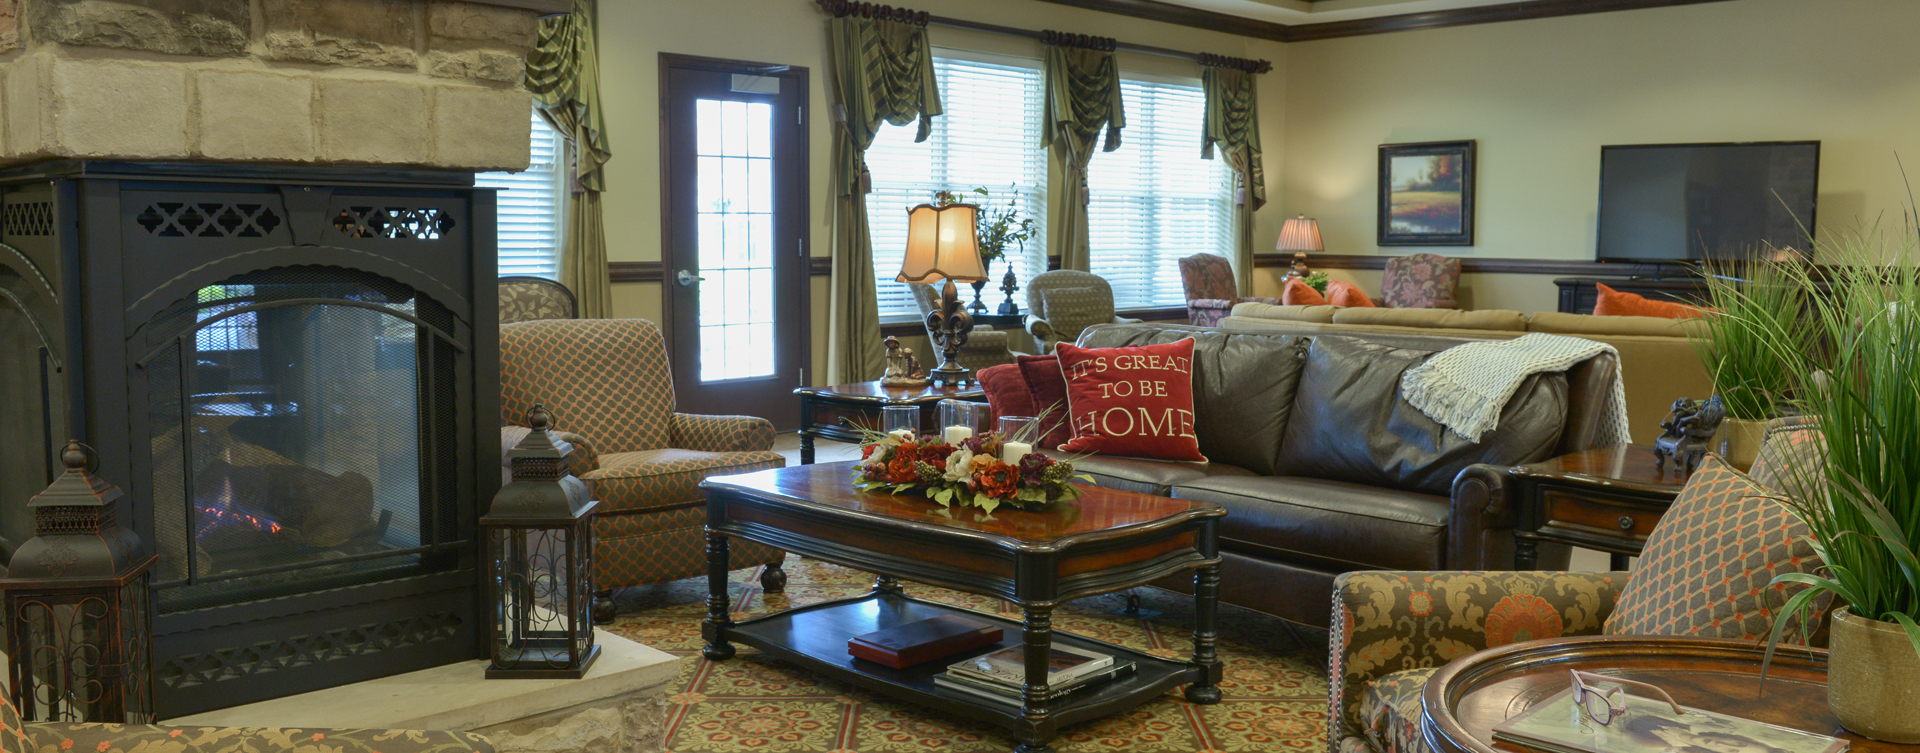 Enjoy a good book in the living room at Bickford of Crown Point